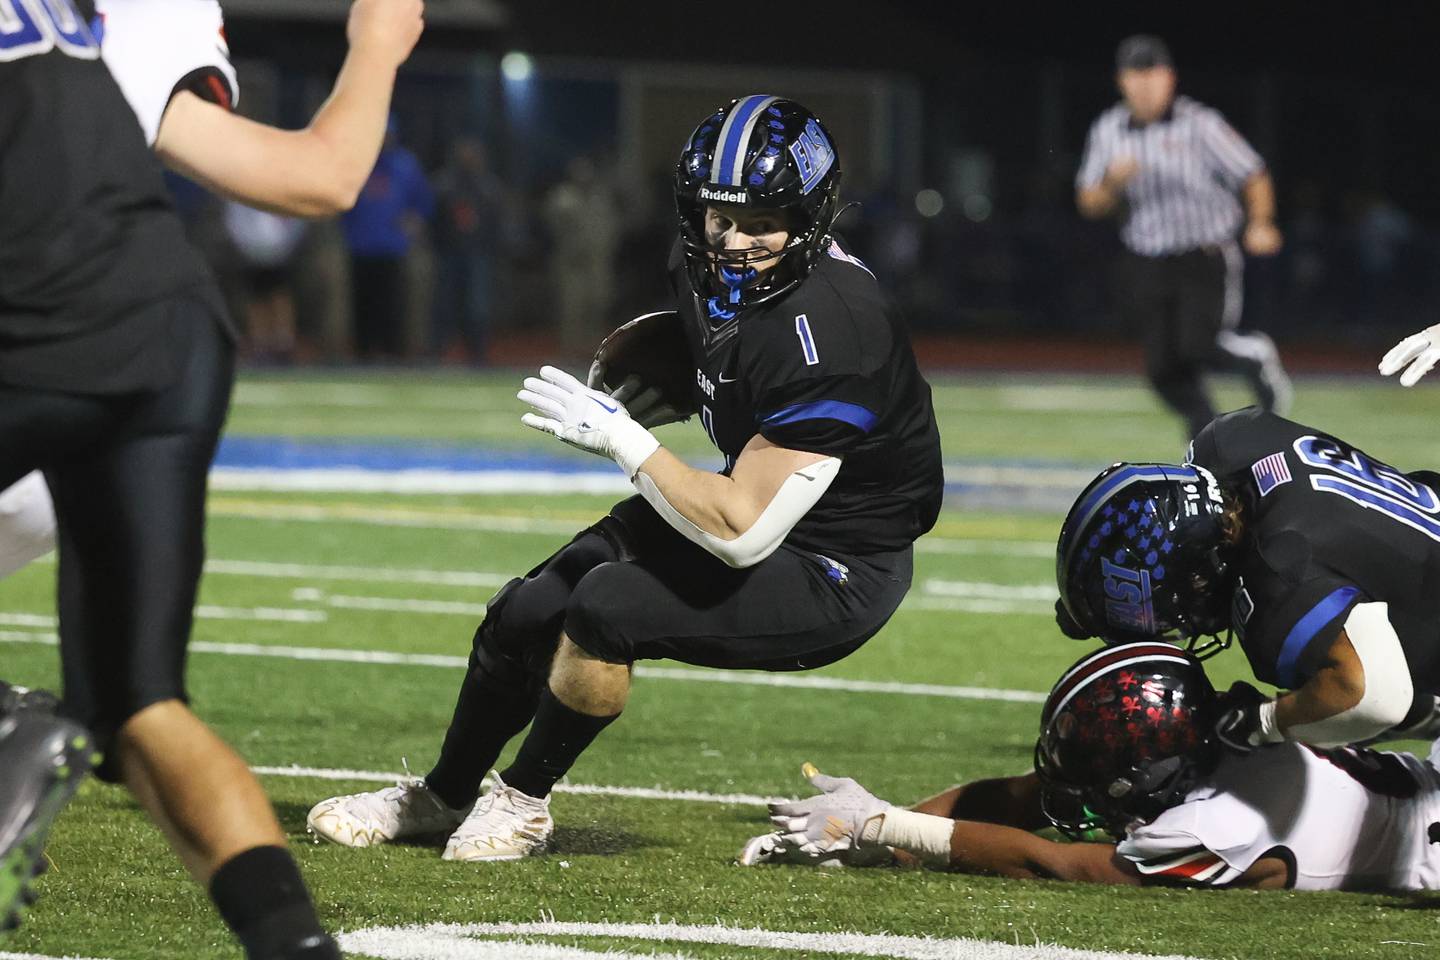 Lincoln-Way East’s Jake Scianna returns an interception against Bolingbrook. Friday, Sept. 23, 2022, in Frankfort.